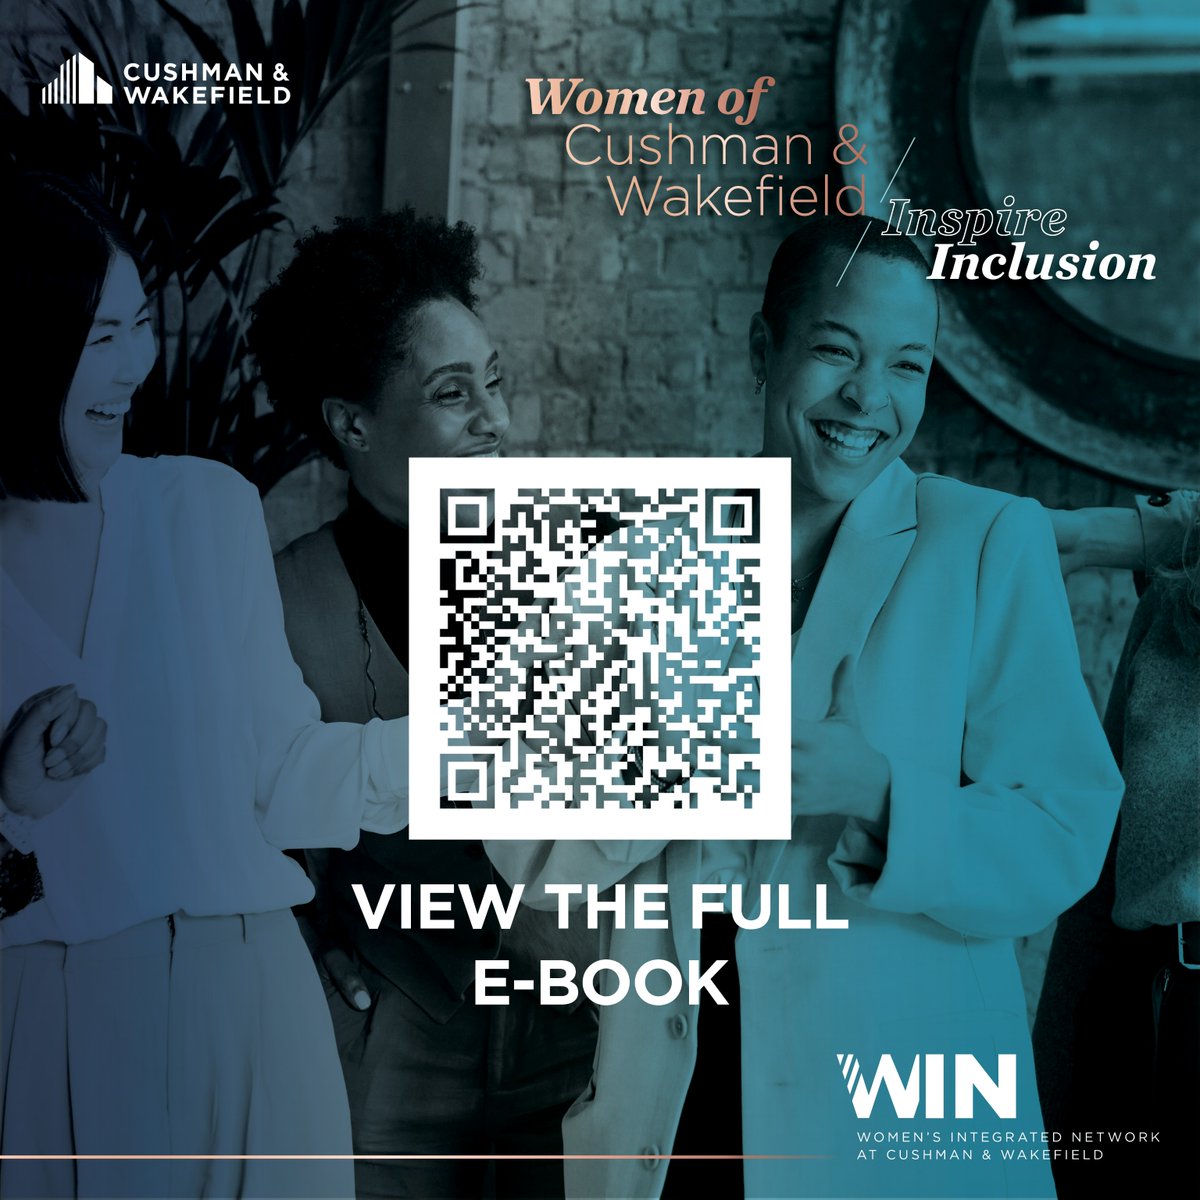 In honor of #IWD2024, we're proud to celebrate the social, economic, cultural & political achievements of women around the world. We thank our outstanding colleagues for the impact they make every day. See how they #InspireInclusion >> cushwk.co/4c94Rbi #CWInspireInclusion